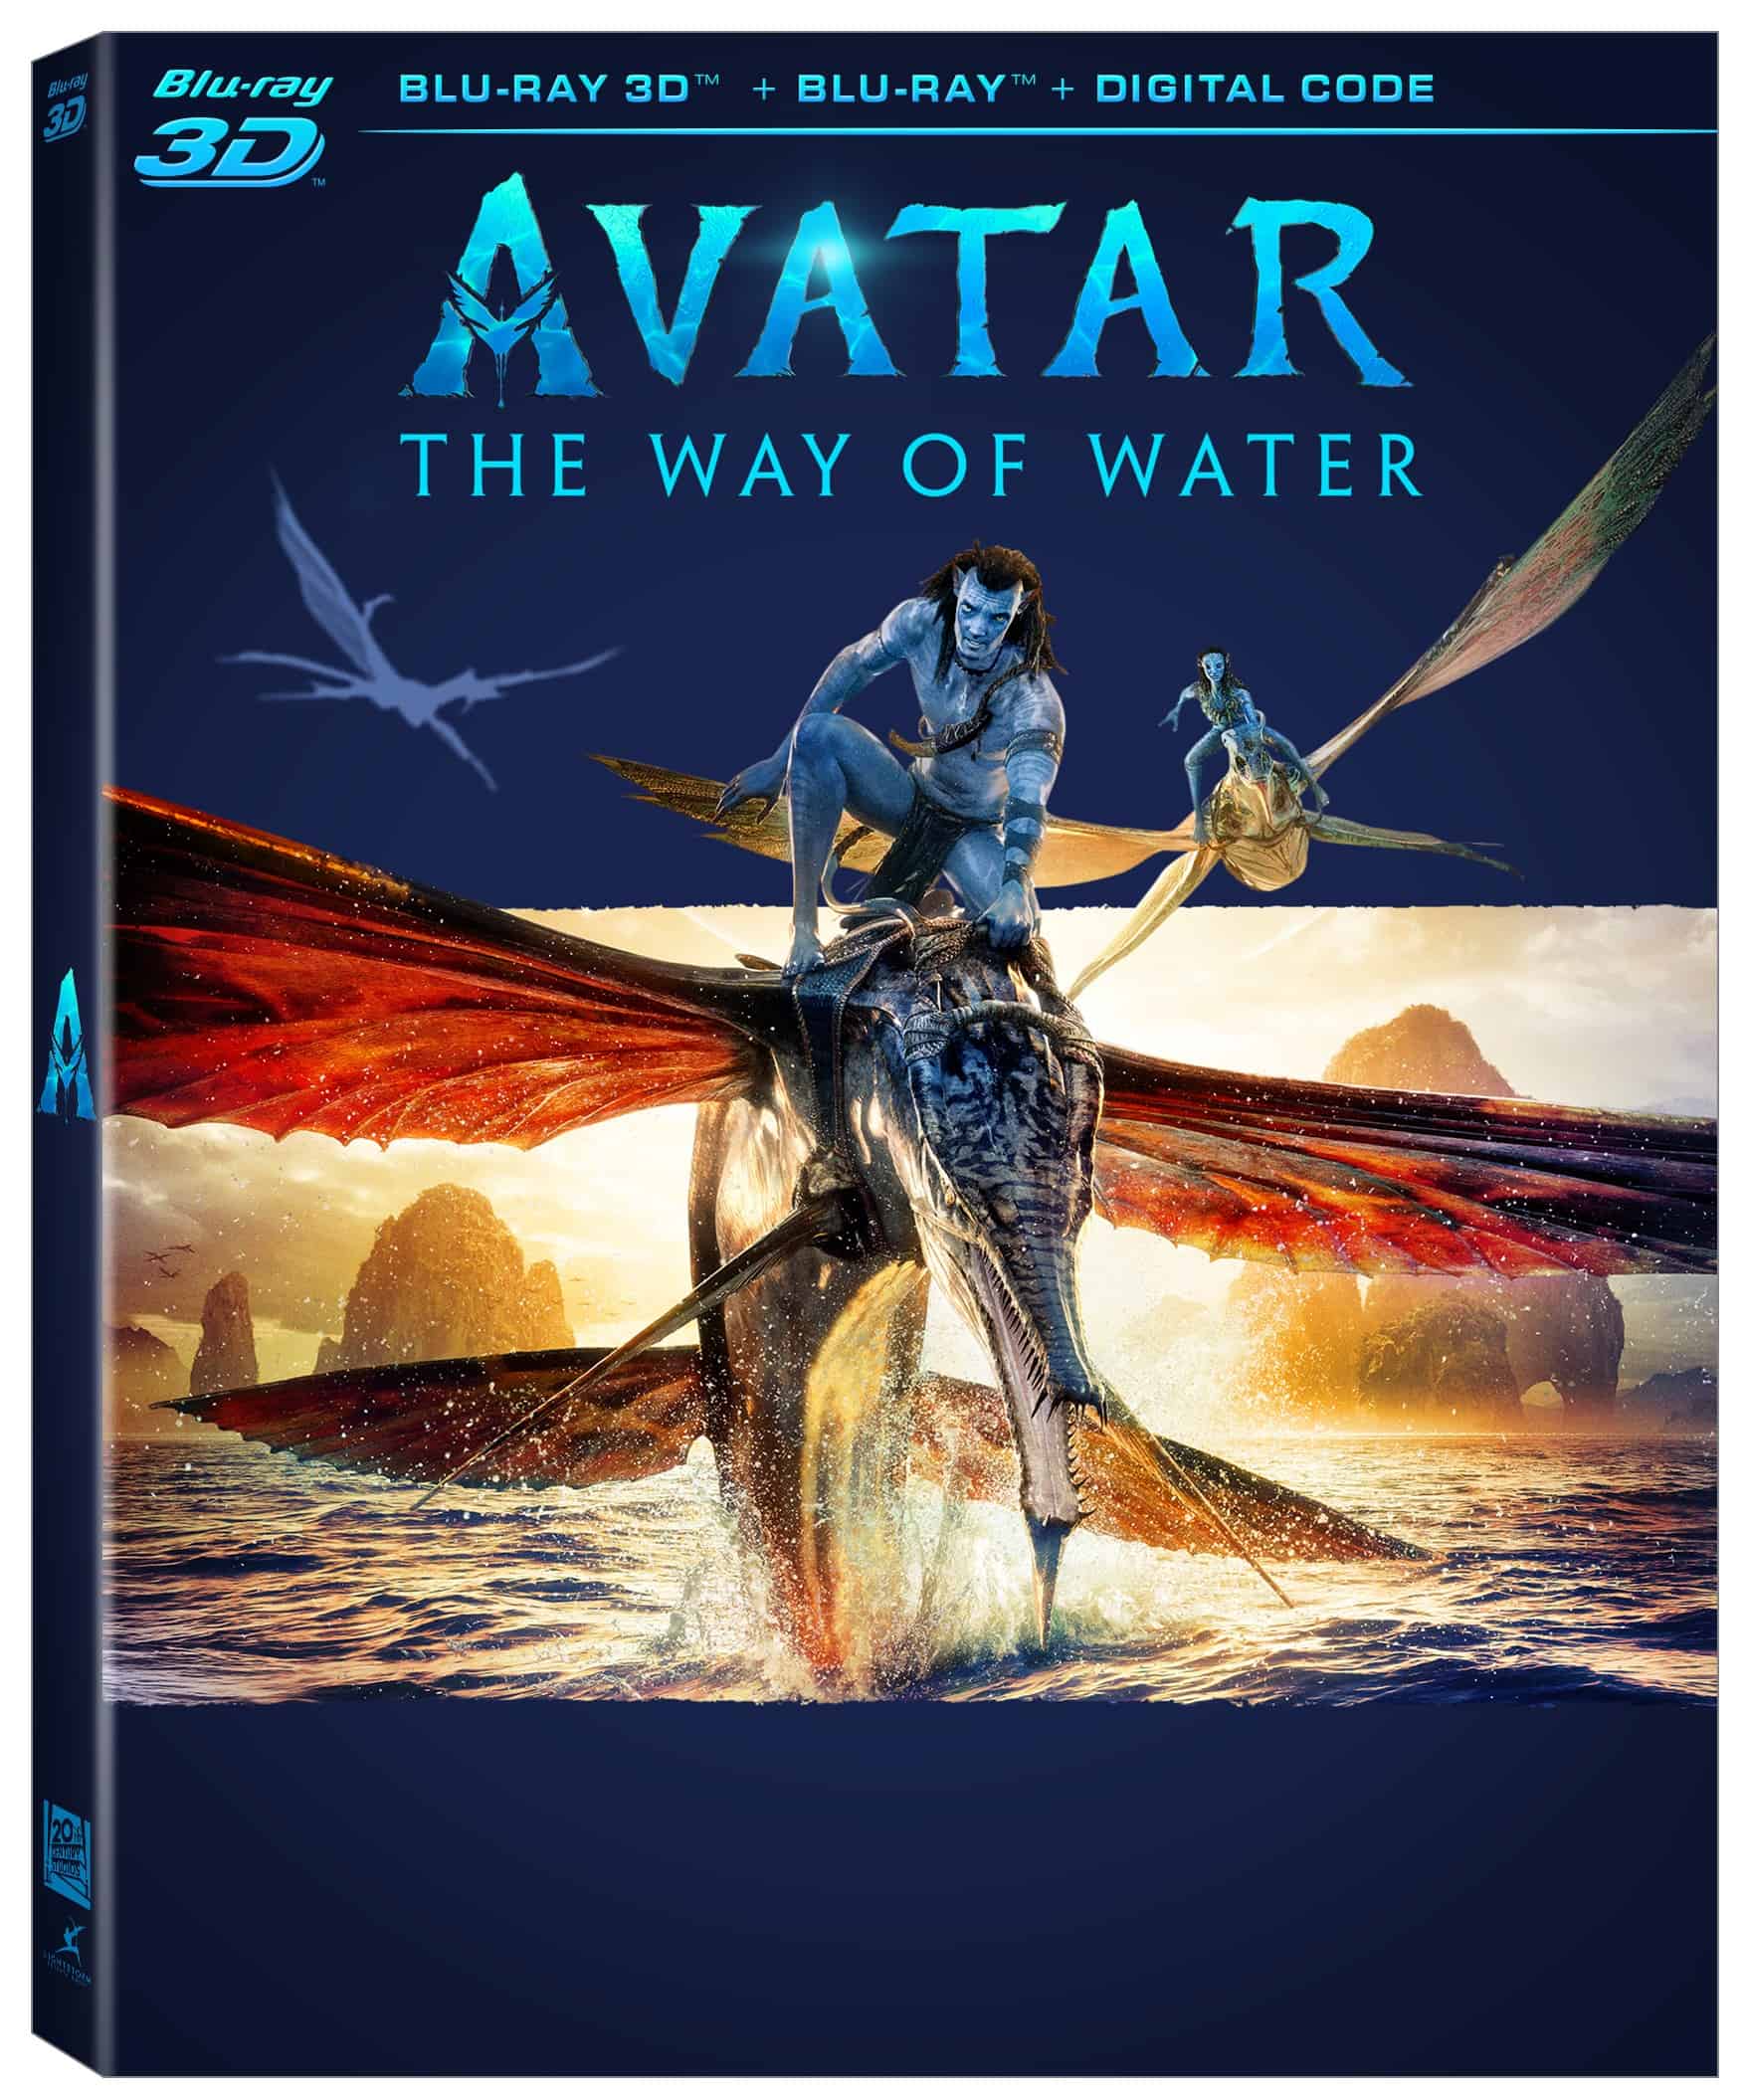 Double Celebration for Avatar Fans: The Arrival of Avatar: The Way of Water and the Ultimate Avatar Experience in 4K UHD 20